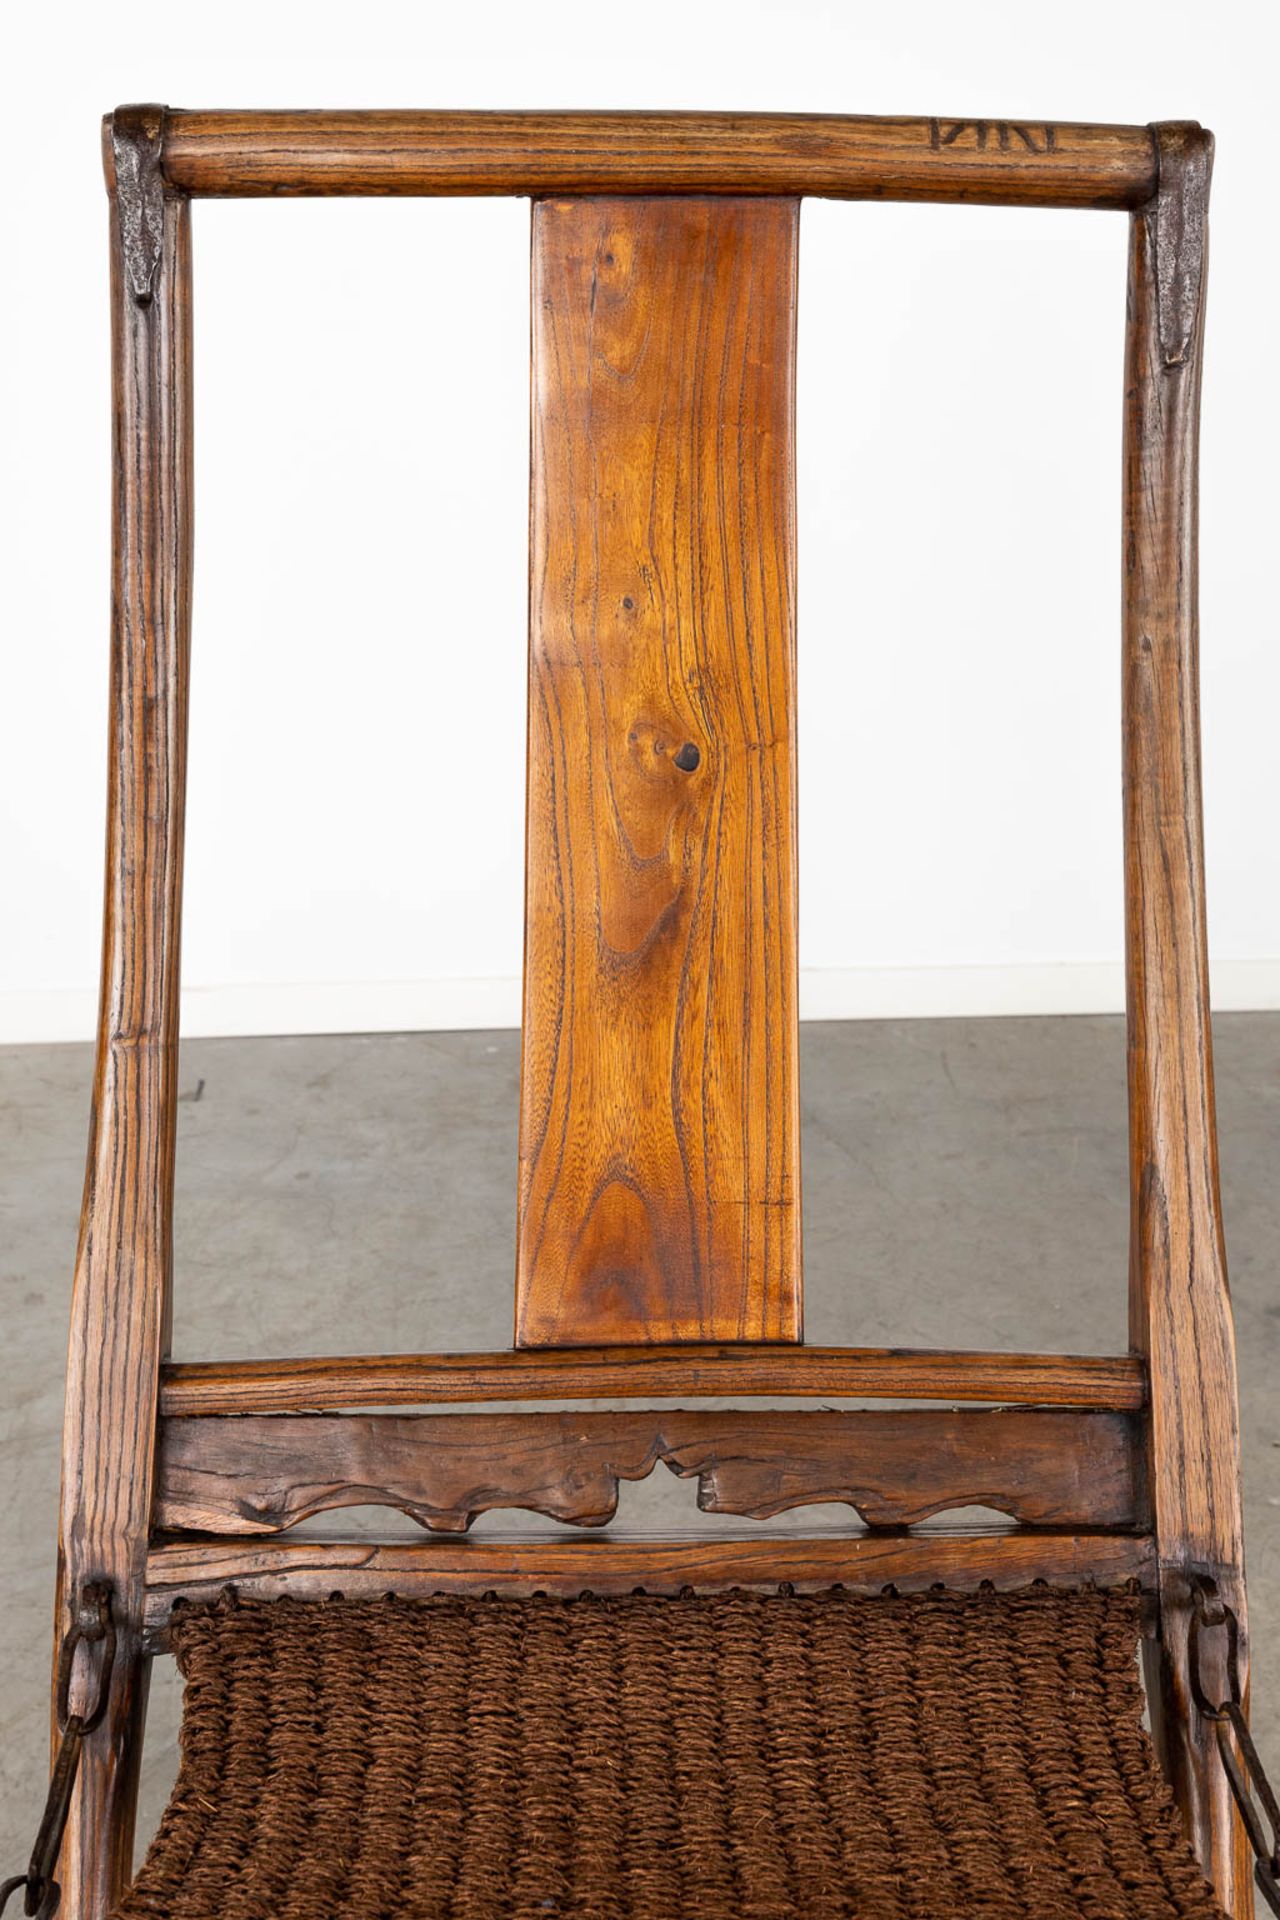 An antique Chinese travellers folding chair, probably 18th/19th C. (D:50 x W:60 x H:116 cm) - Image 10 of 12